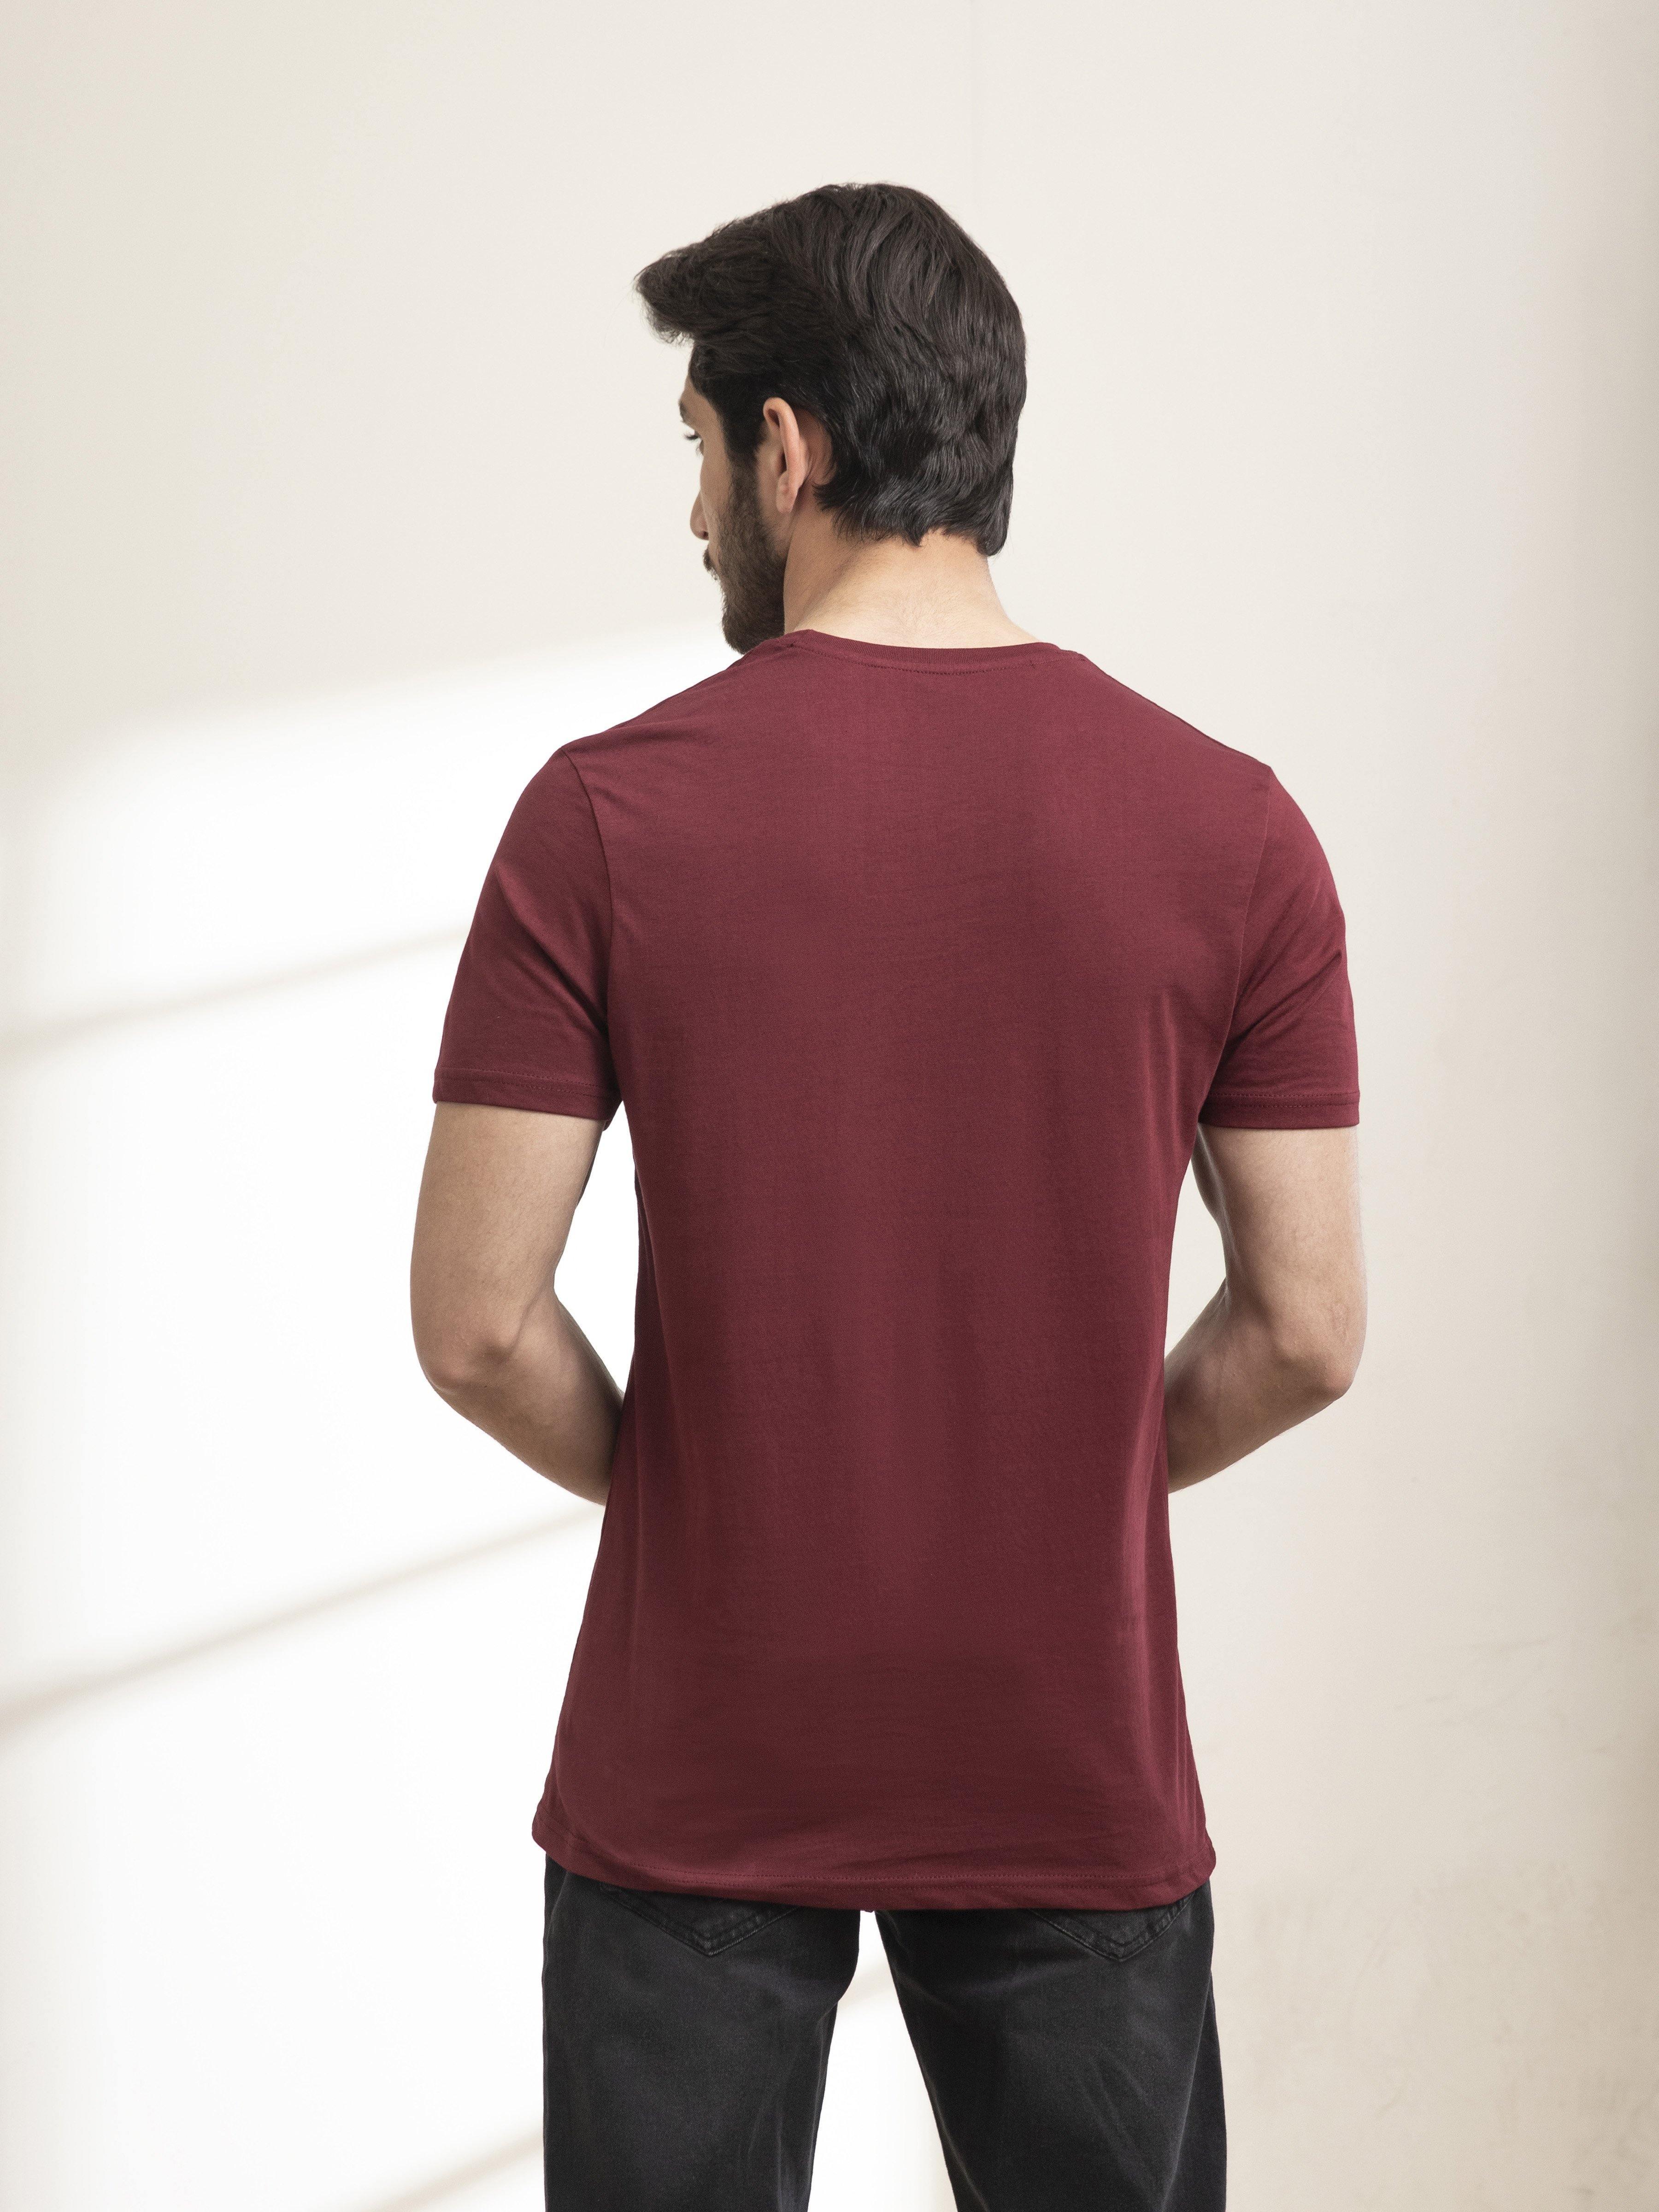 T SHIRT ROUND NECK SURF CLUB MAROON at Charcoal Clothing